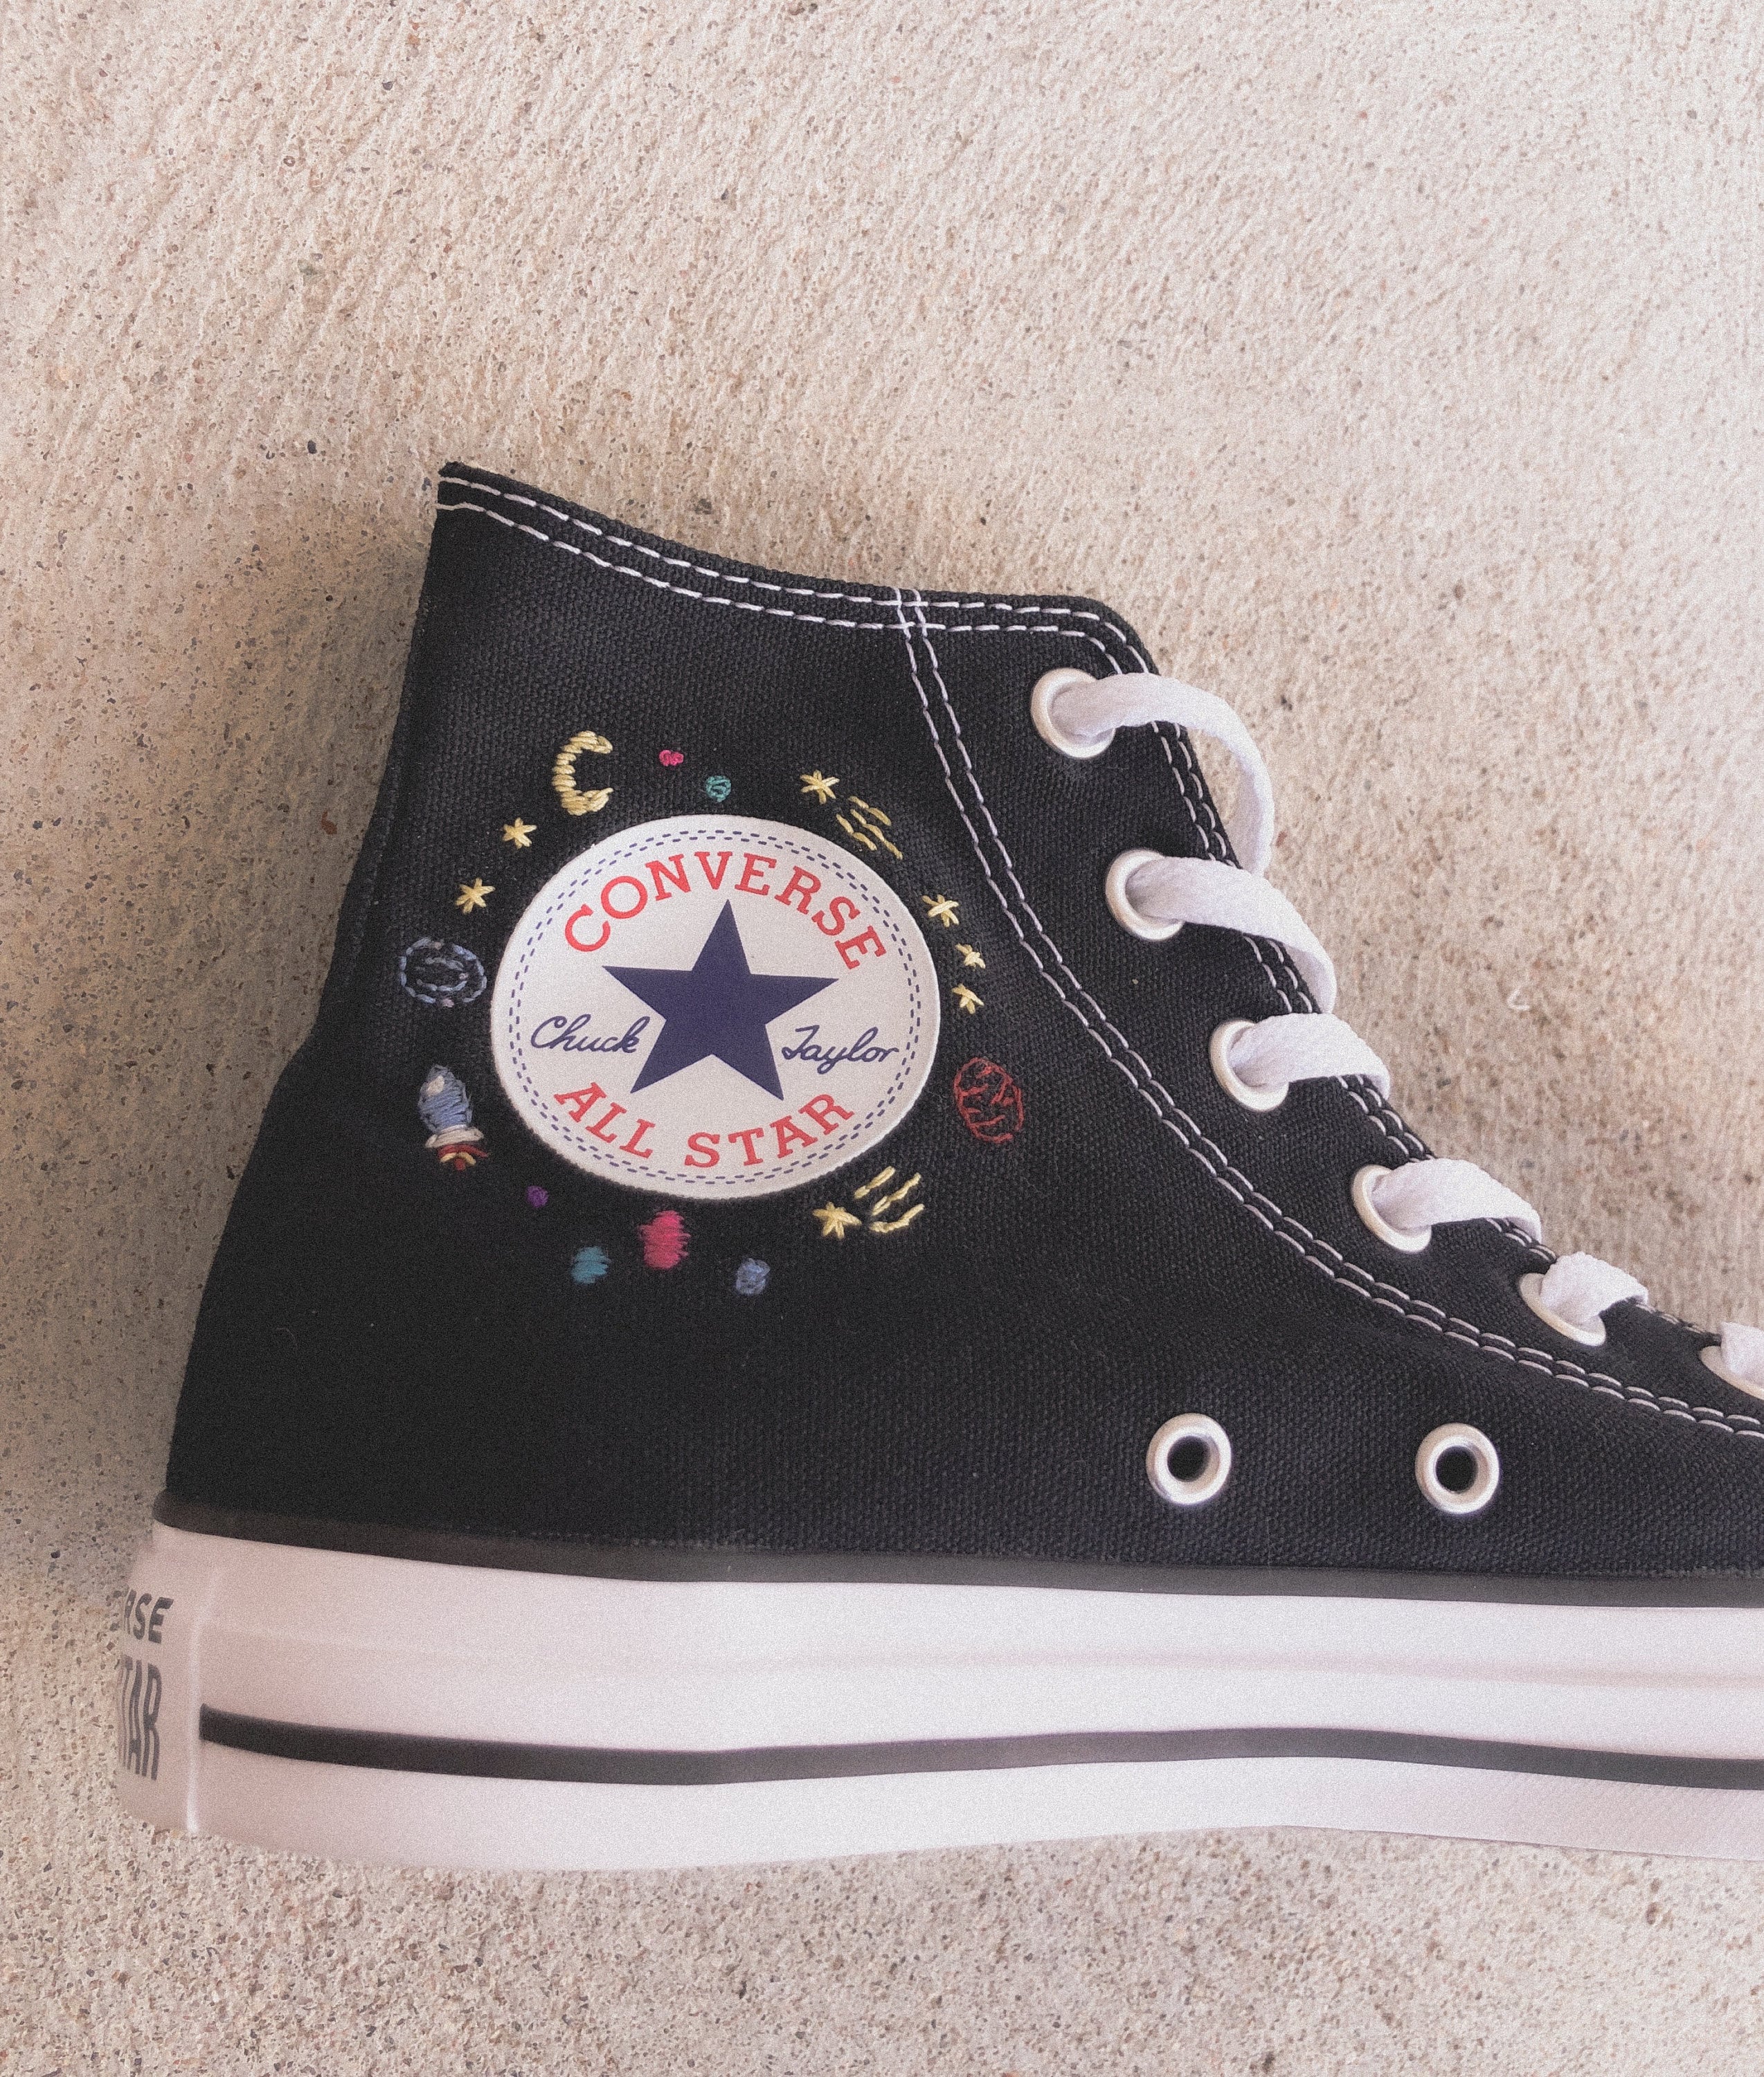 converse high tops with designs